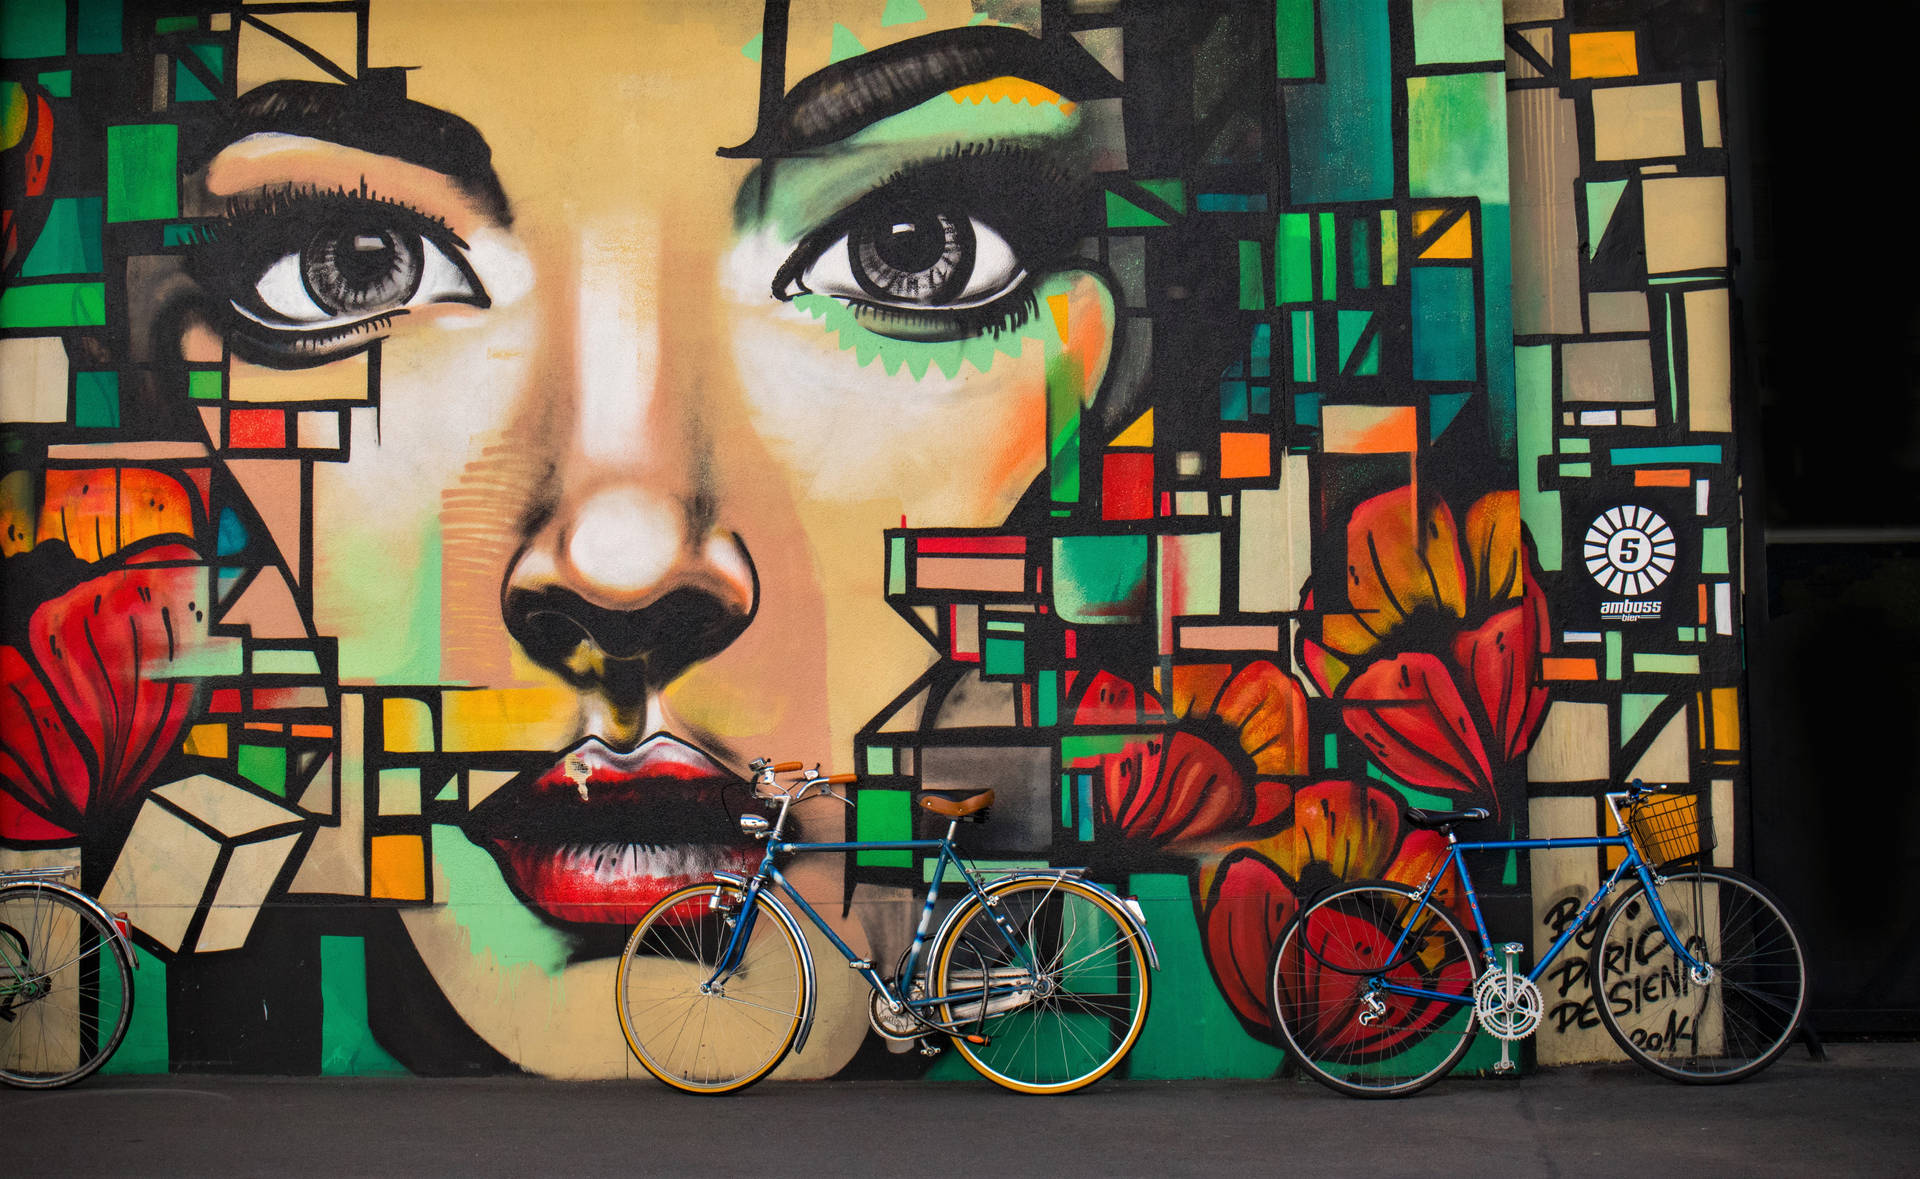 Parked Bicycles On Mural Background